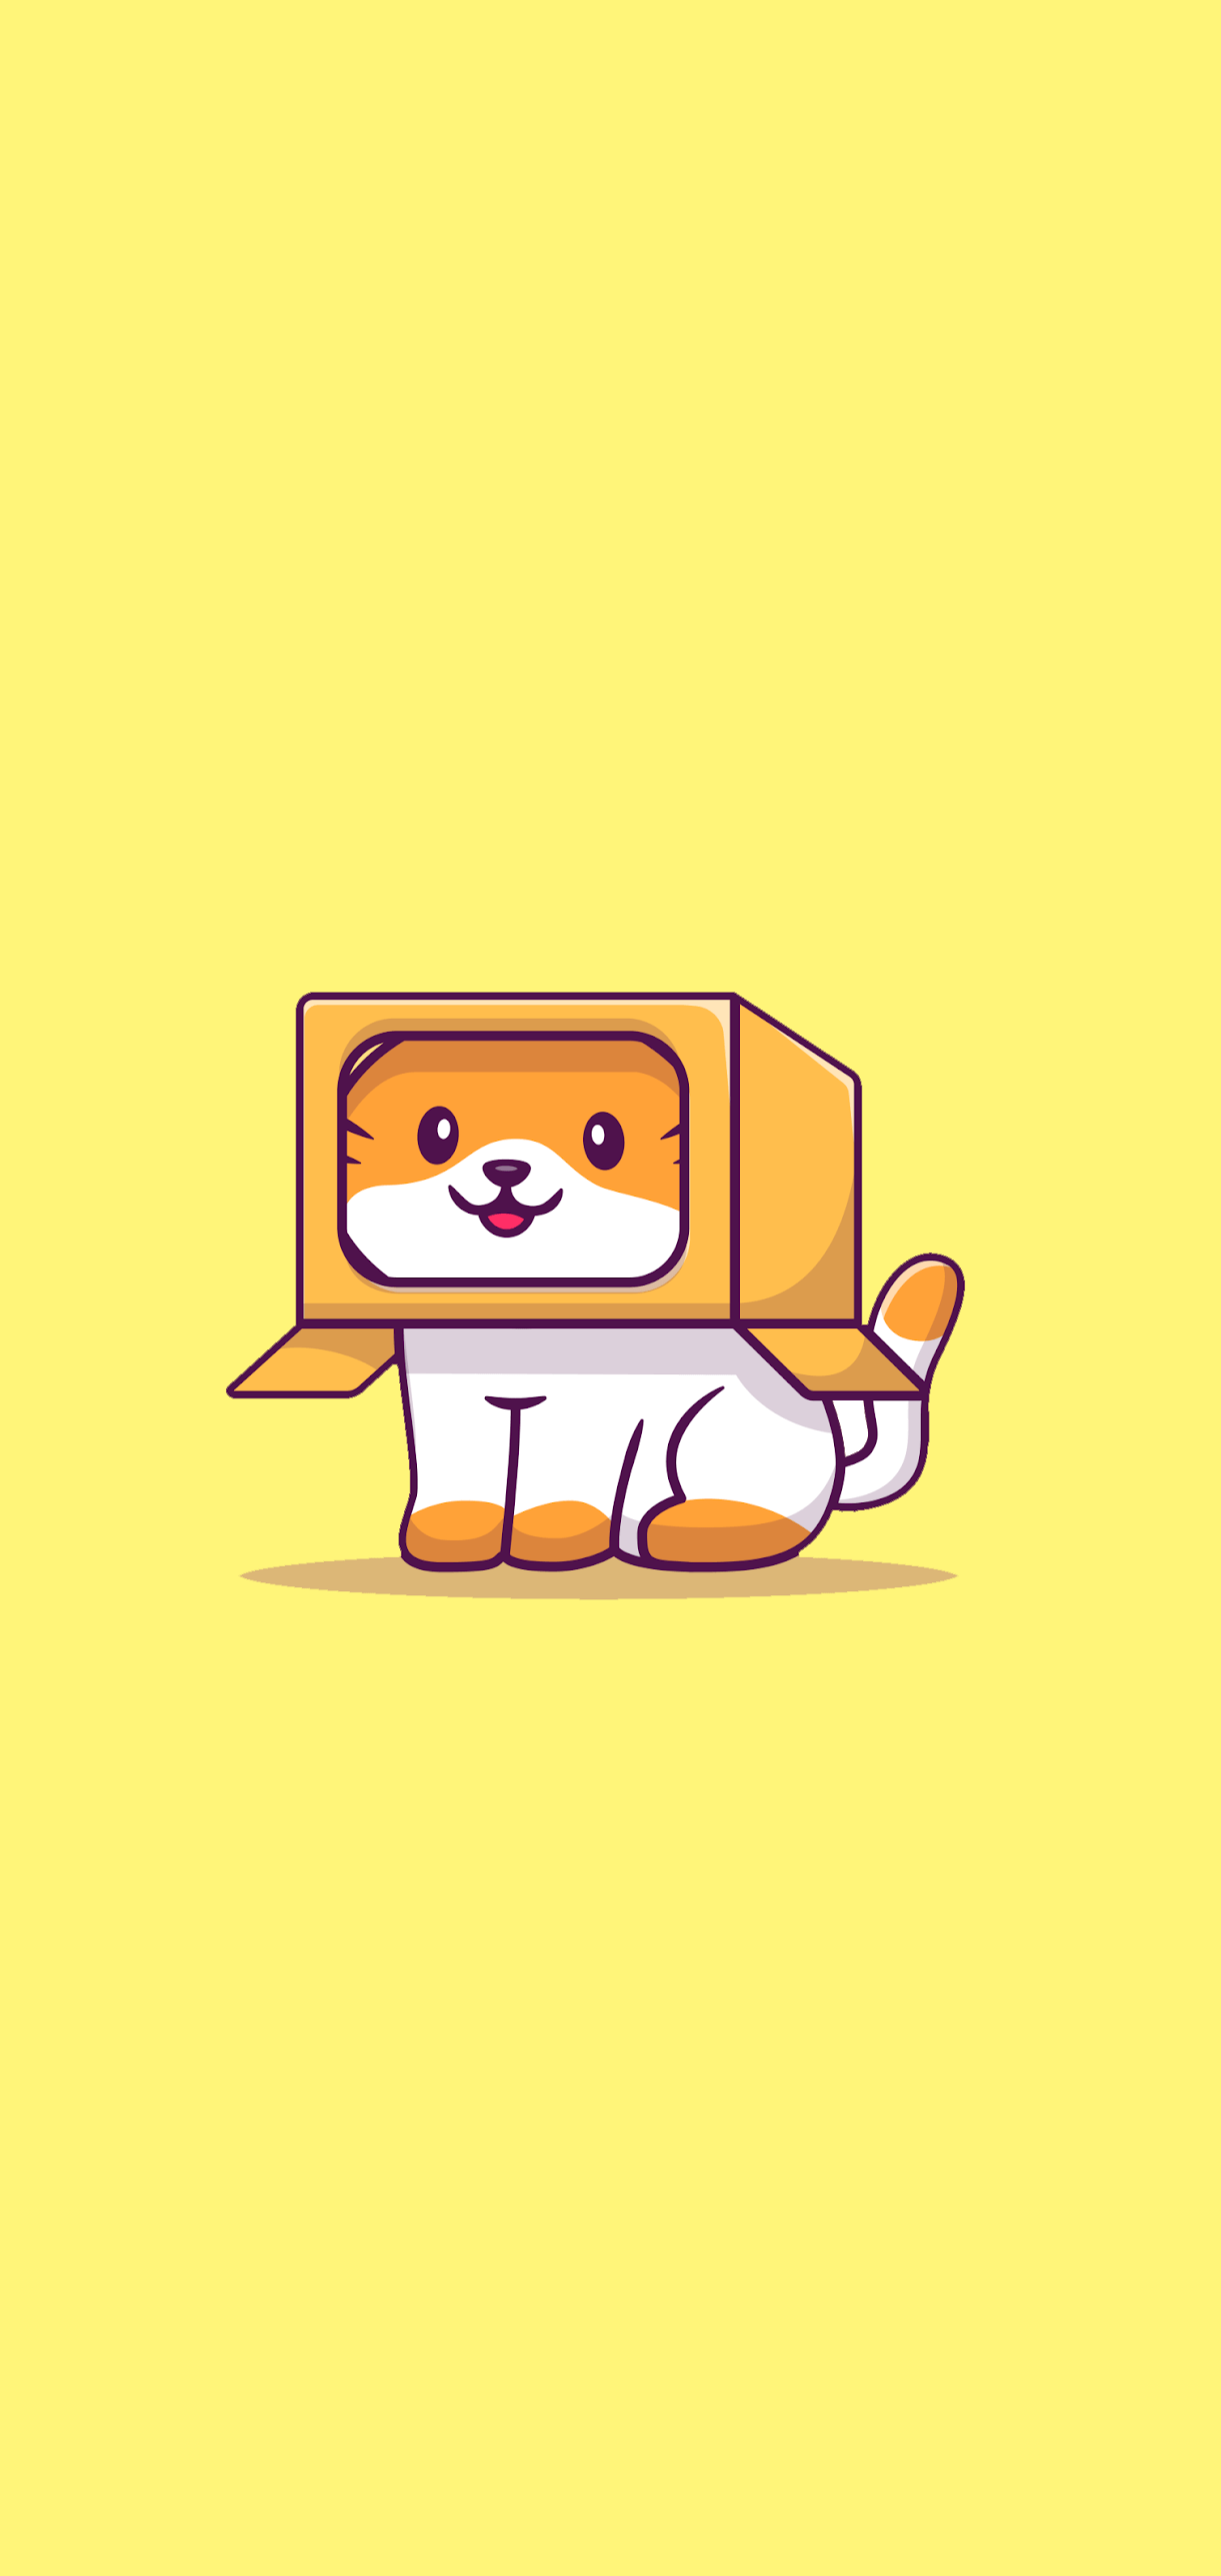 A cute illustration of a cat wearing a box as a helmet. - Duck